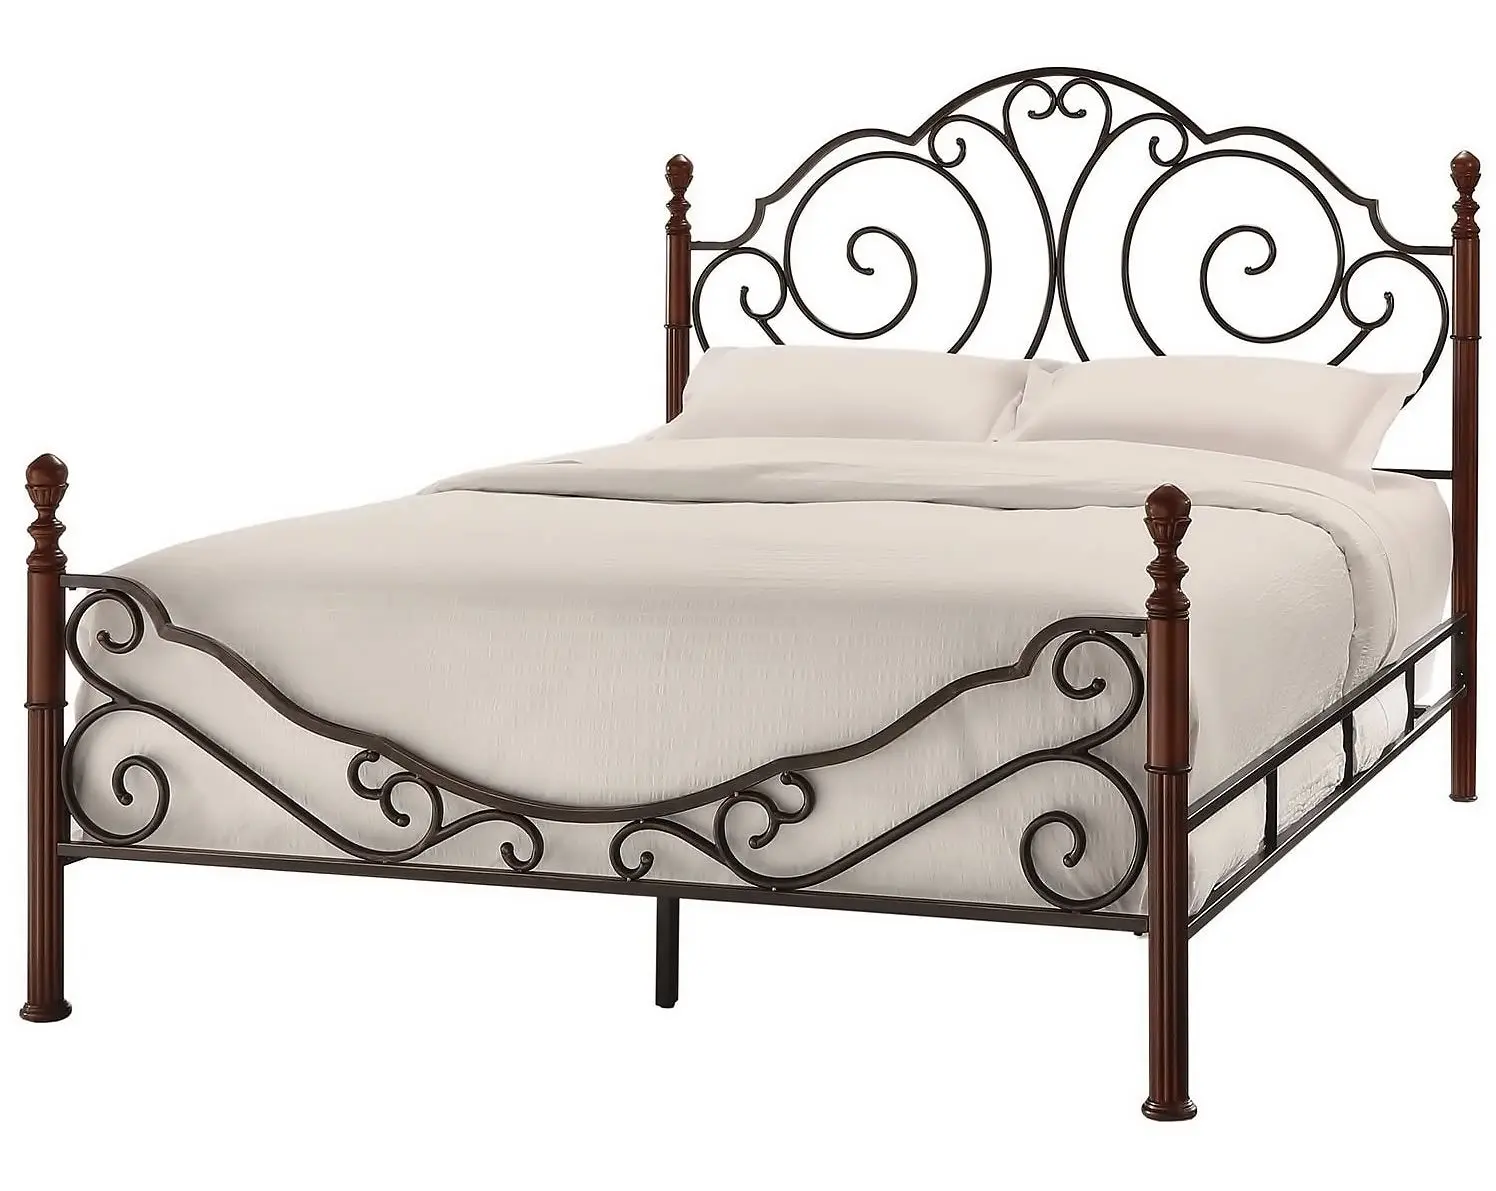 The Best Four Poster Beds To In, Leann Graceful Scroll Bronze Iron Bed Frame King